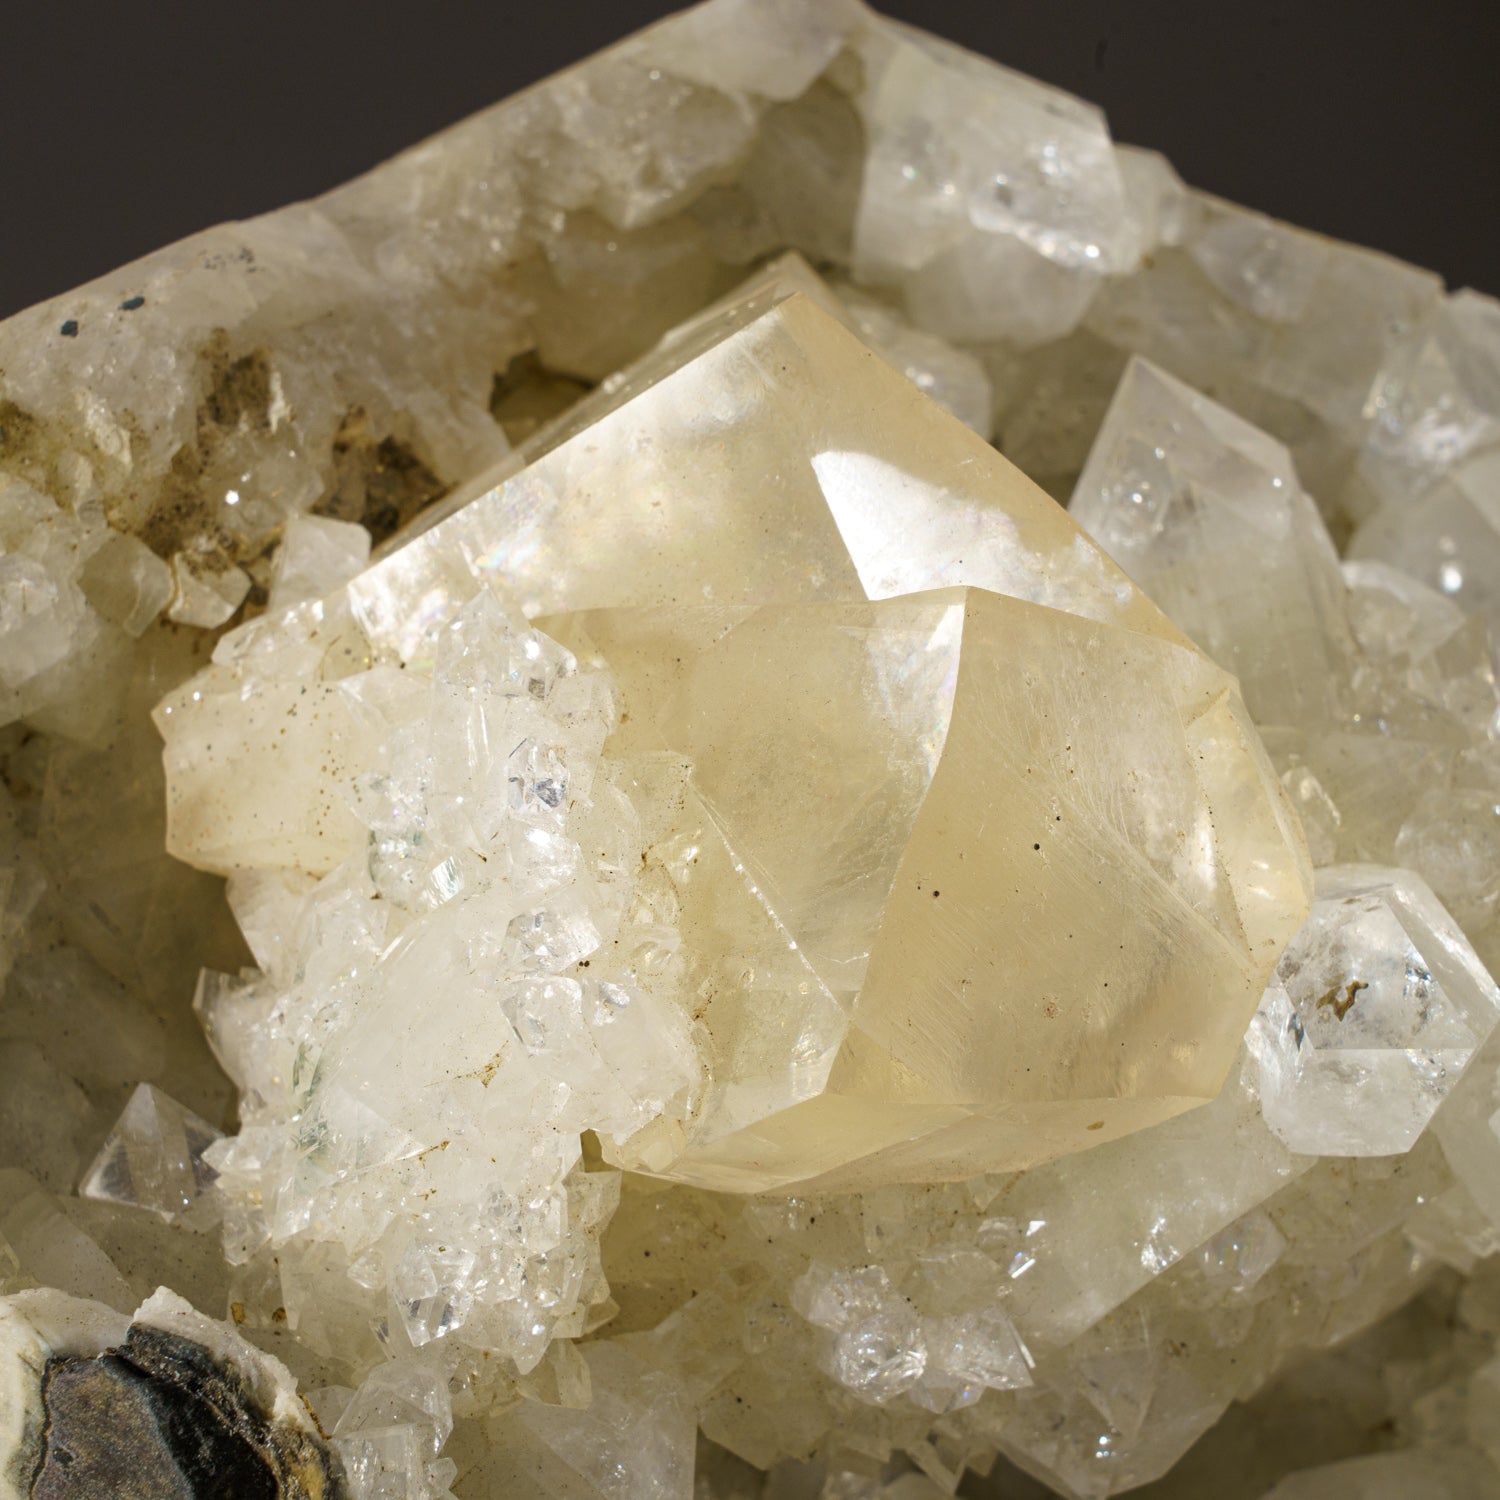 Twin Calcite with Apophyllite From Nasik District, Maharashtra, India